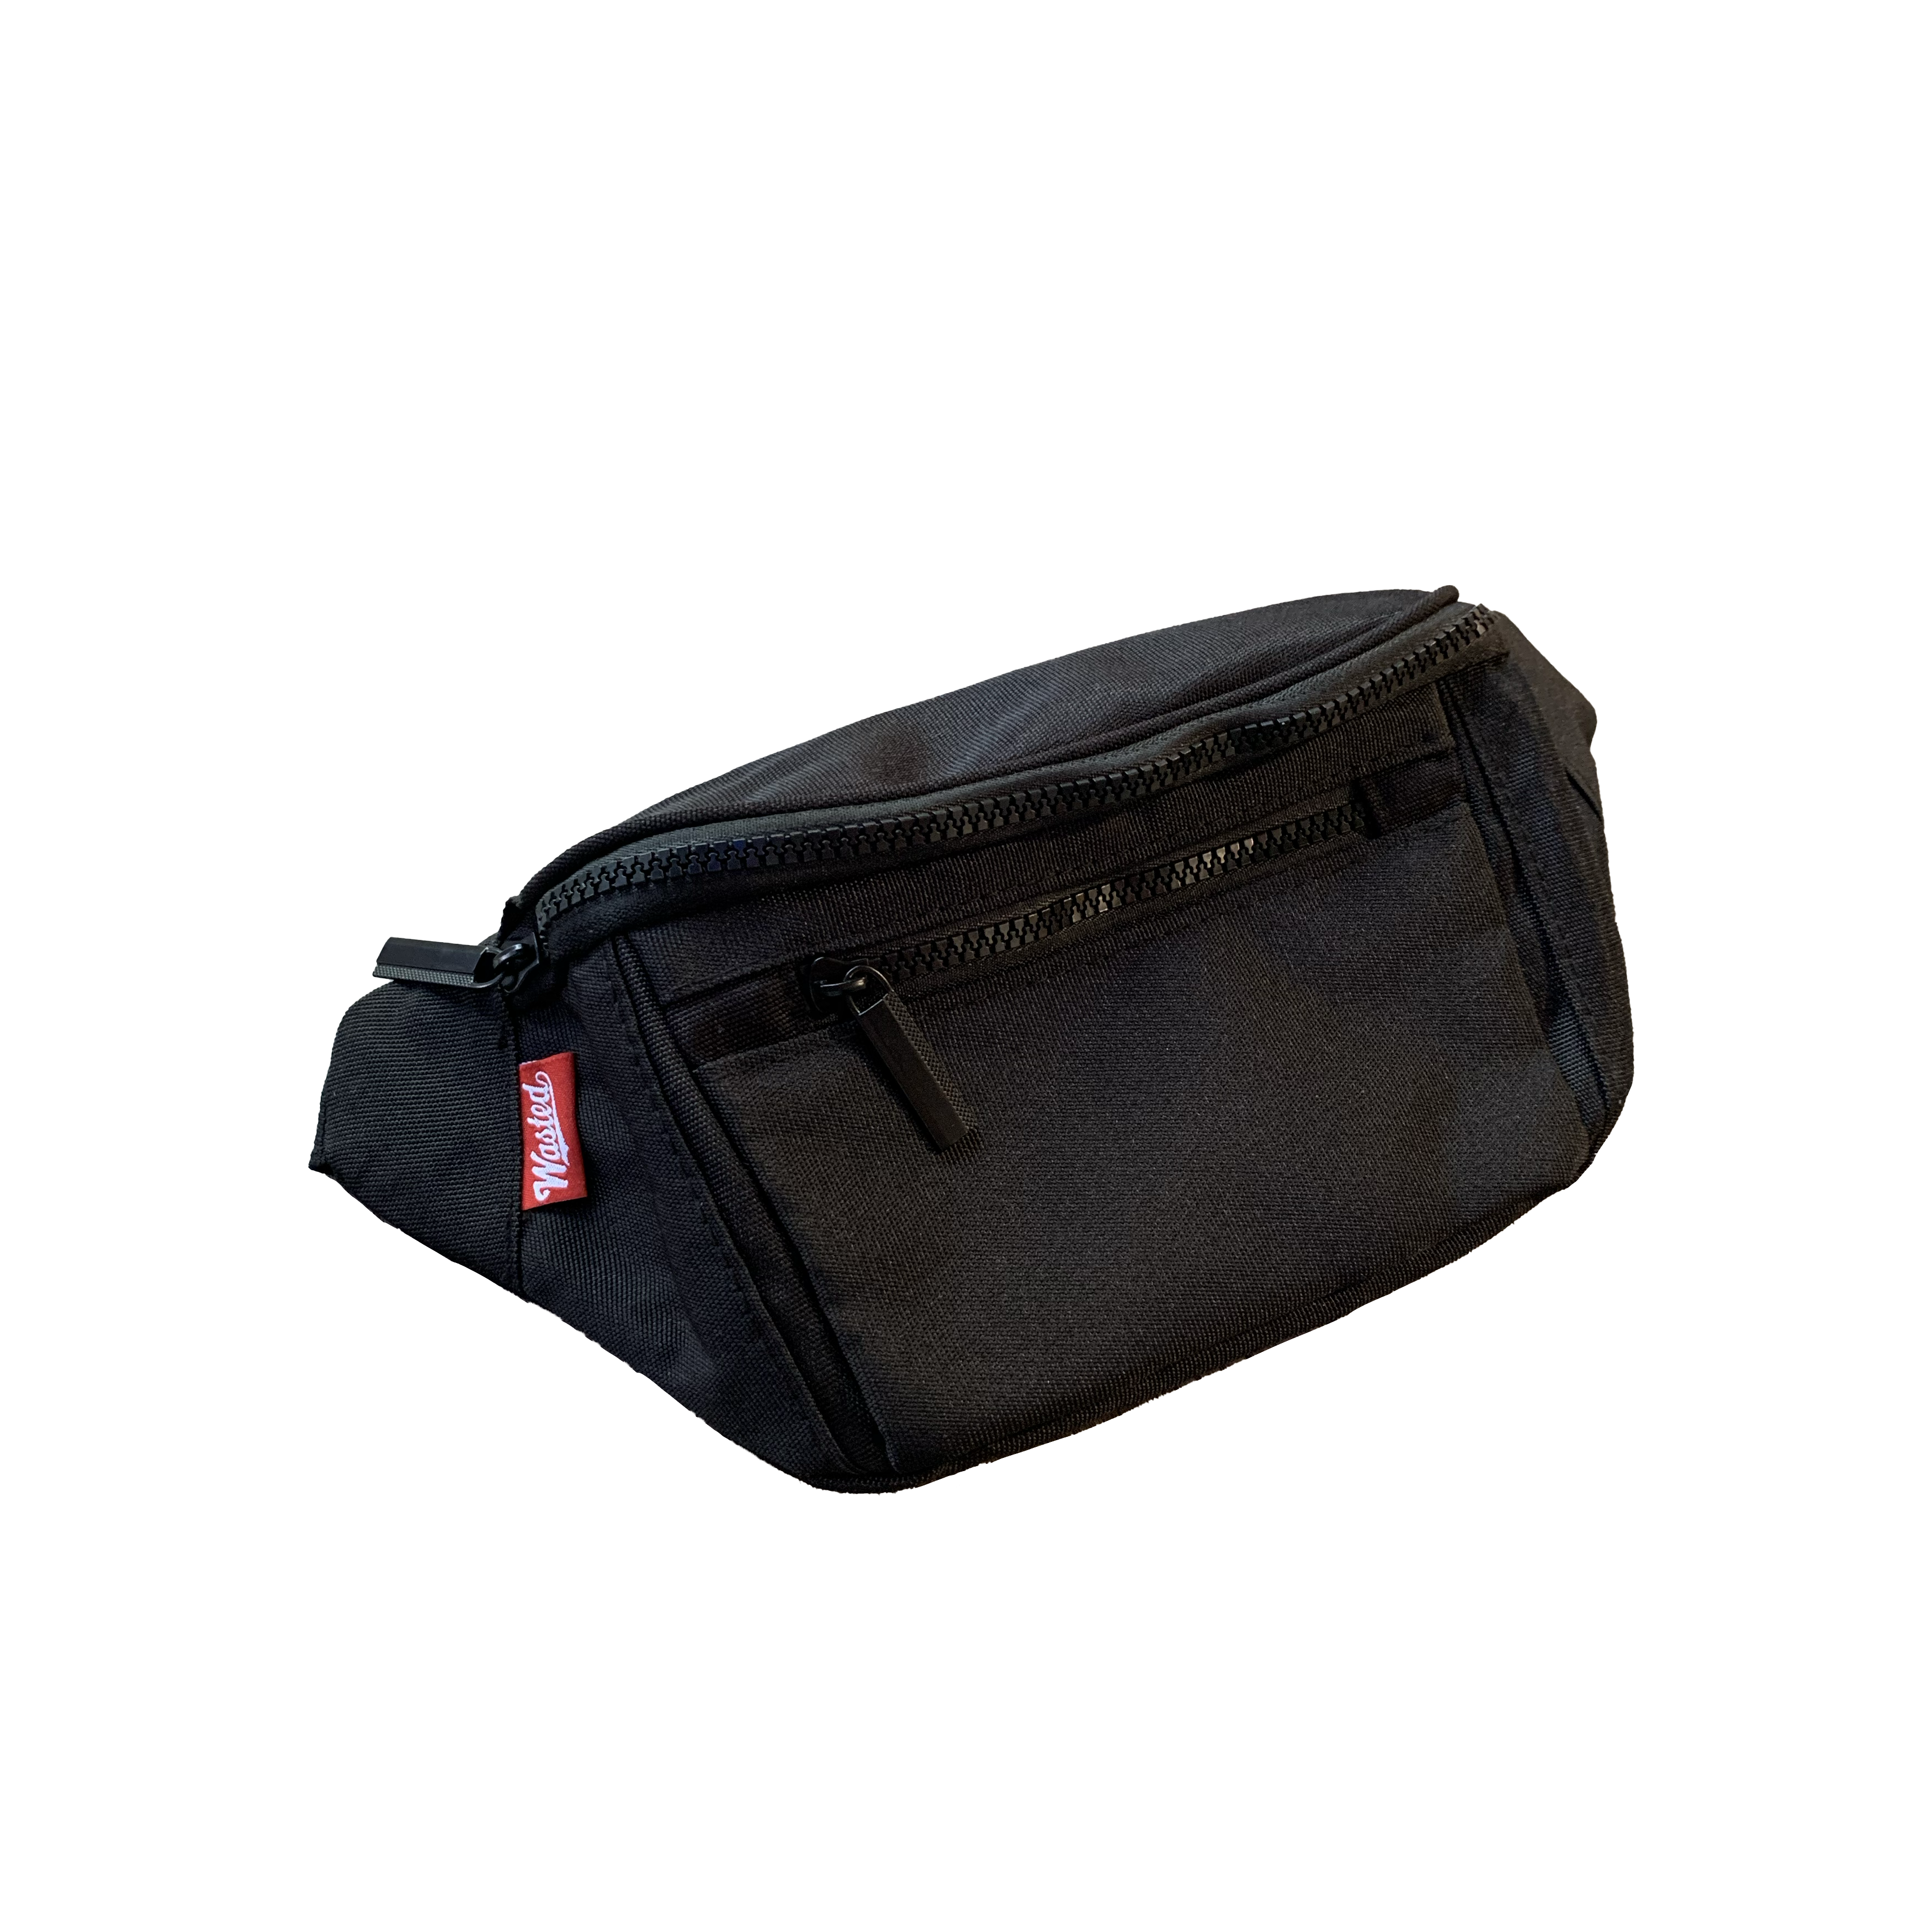 Smuggler Adventure Duffel Bag is the perfect option for hauling gear – 3V  Gear